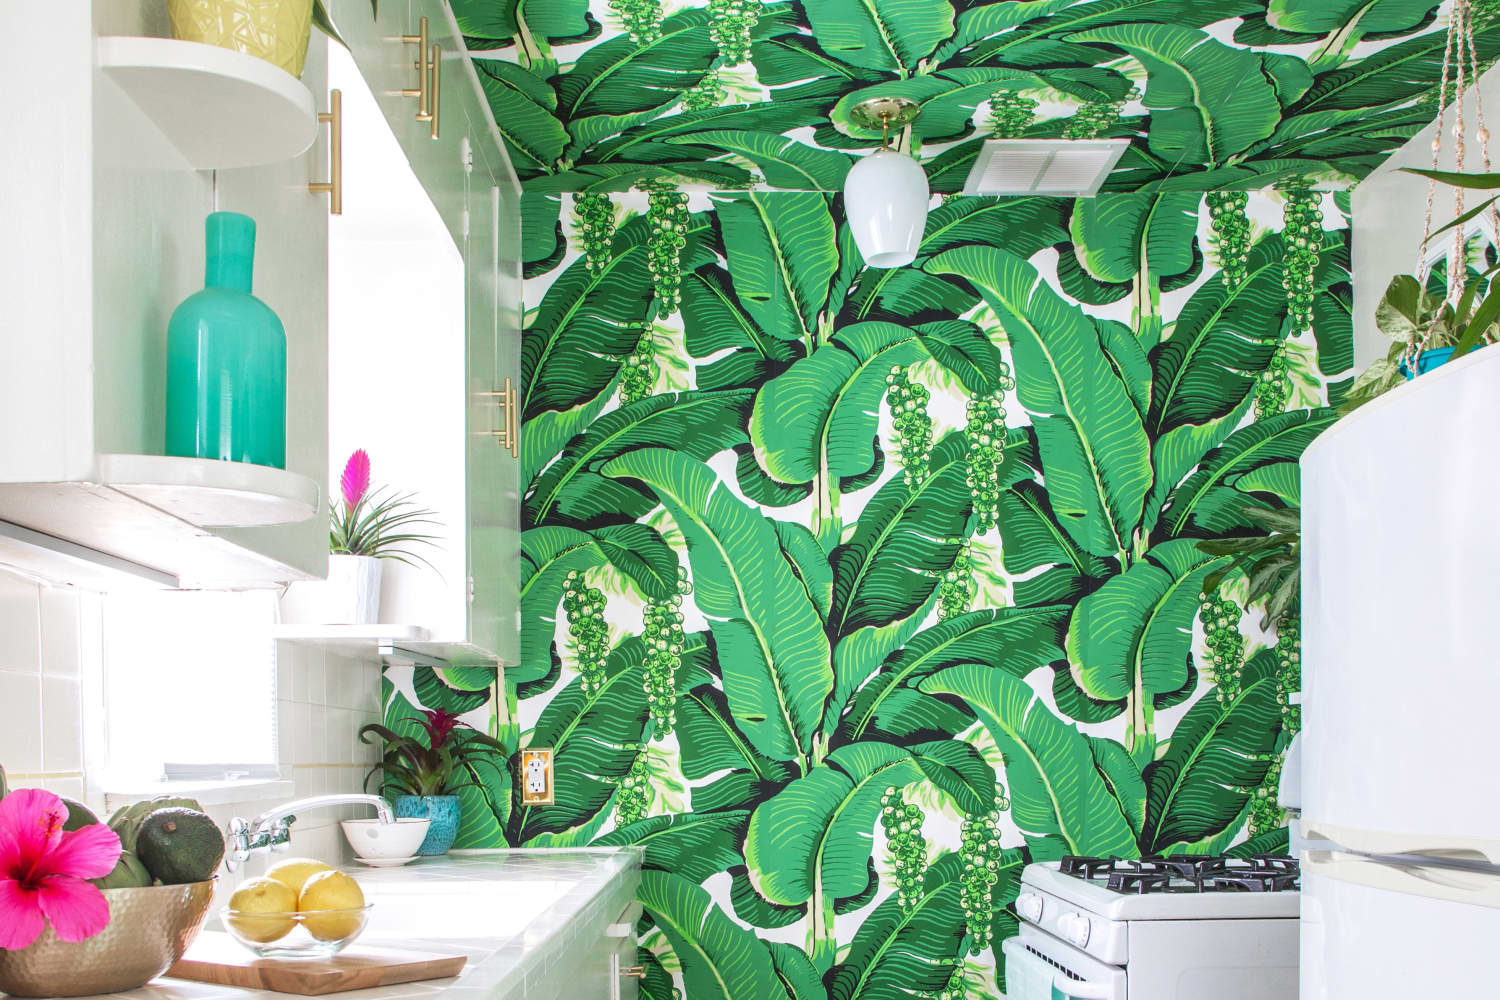 A Gallery of Leafy Plant Wallpapers, Fabrics & Prints | Apartment Therapy